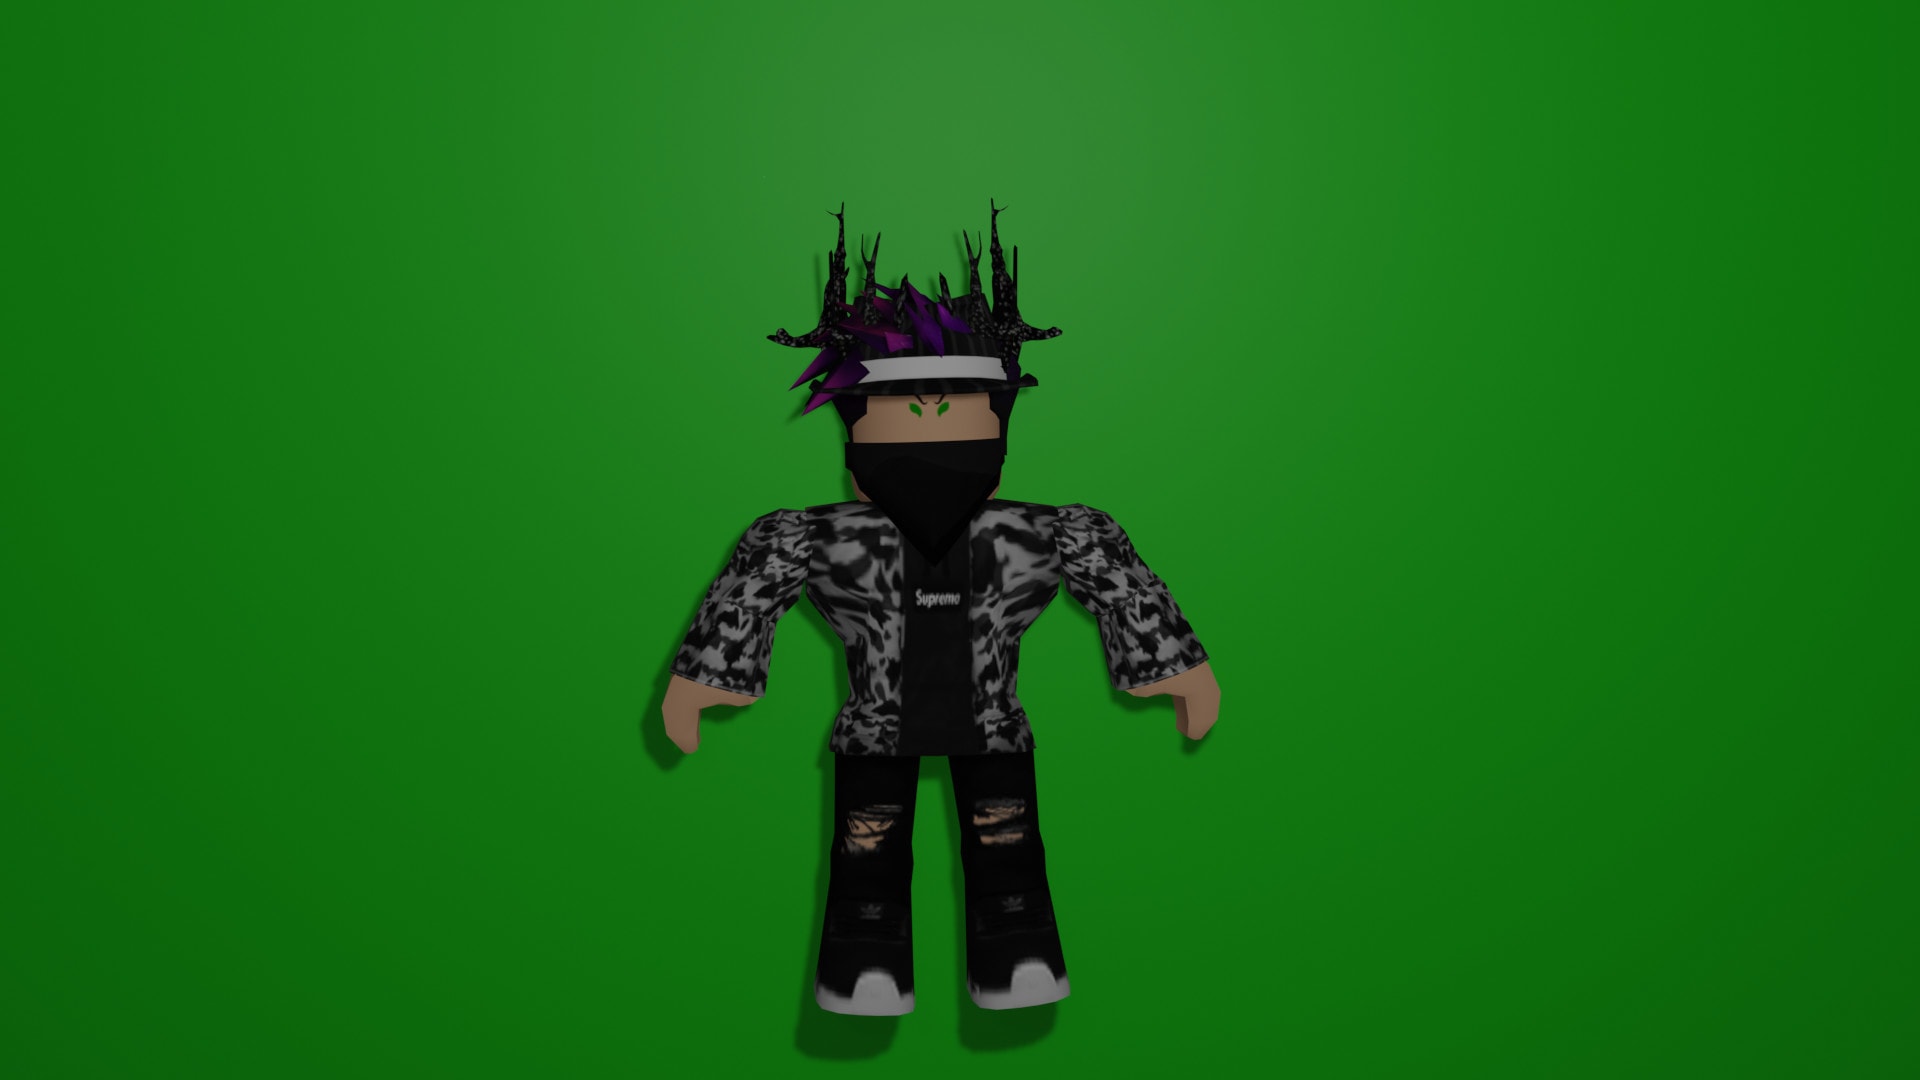 Render Your Roblox Character With Pose By Skylerperritt - roblox head wallpaper